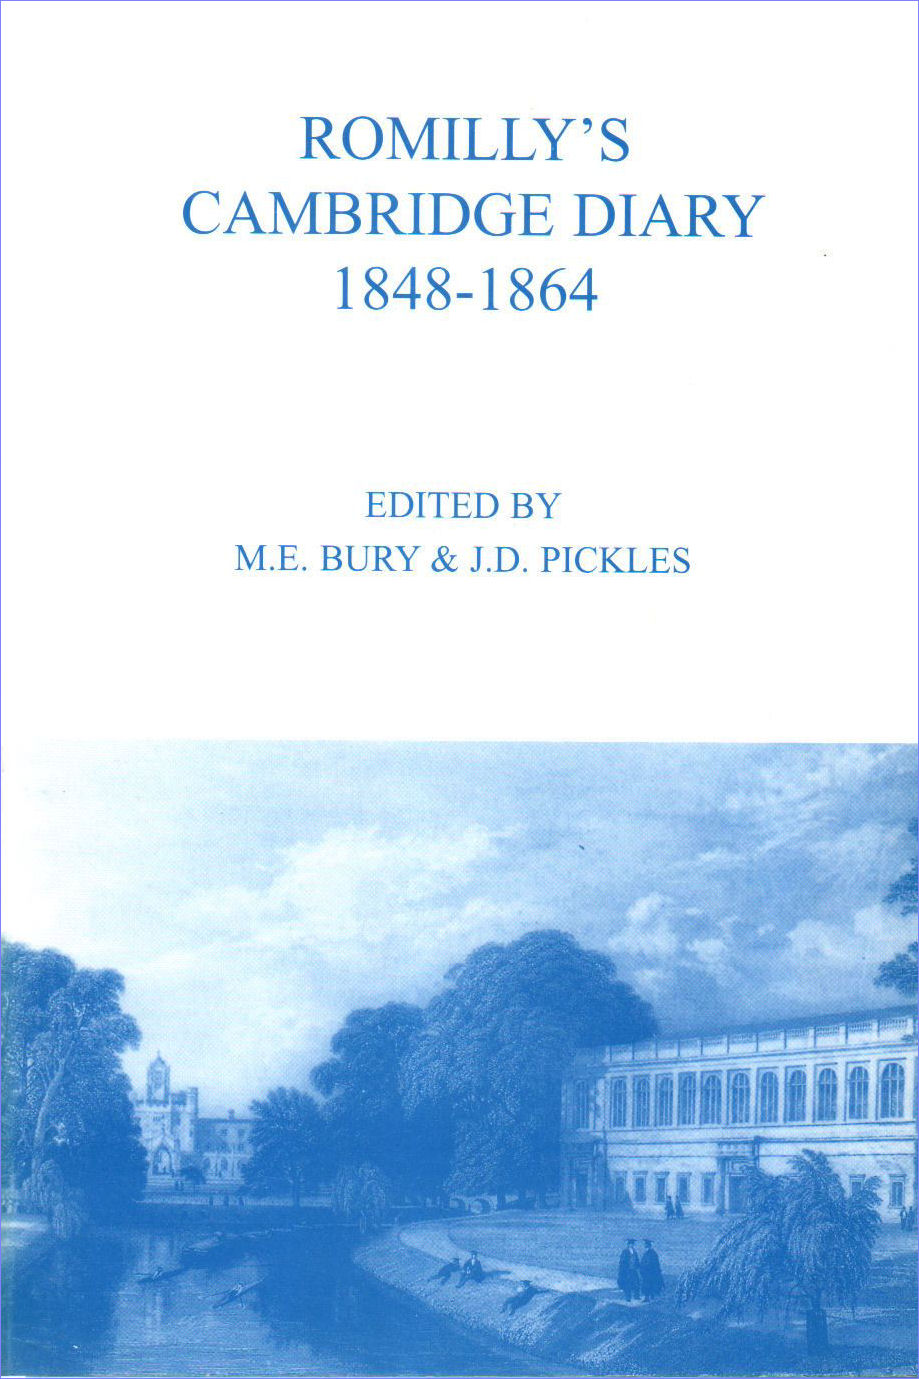 14. Romilly's Cambridge Diary 1848-1864.  Edited by M.E. Bury and J.D. Pickles.